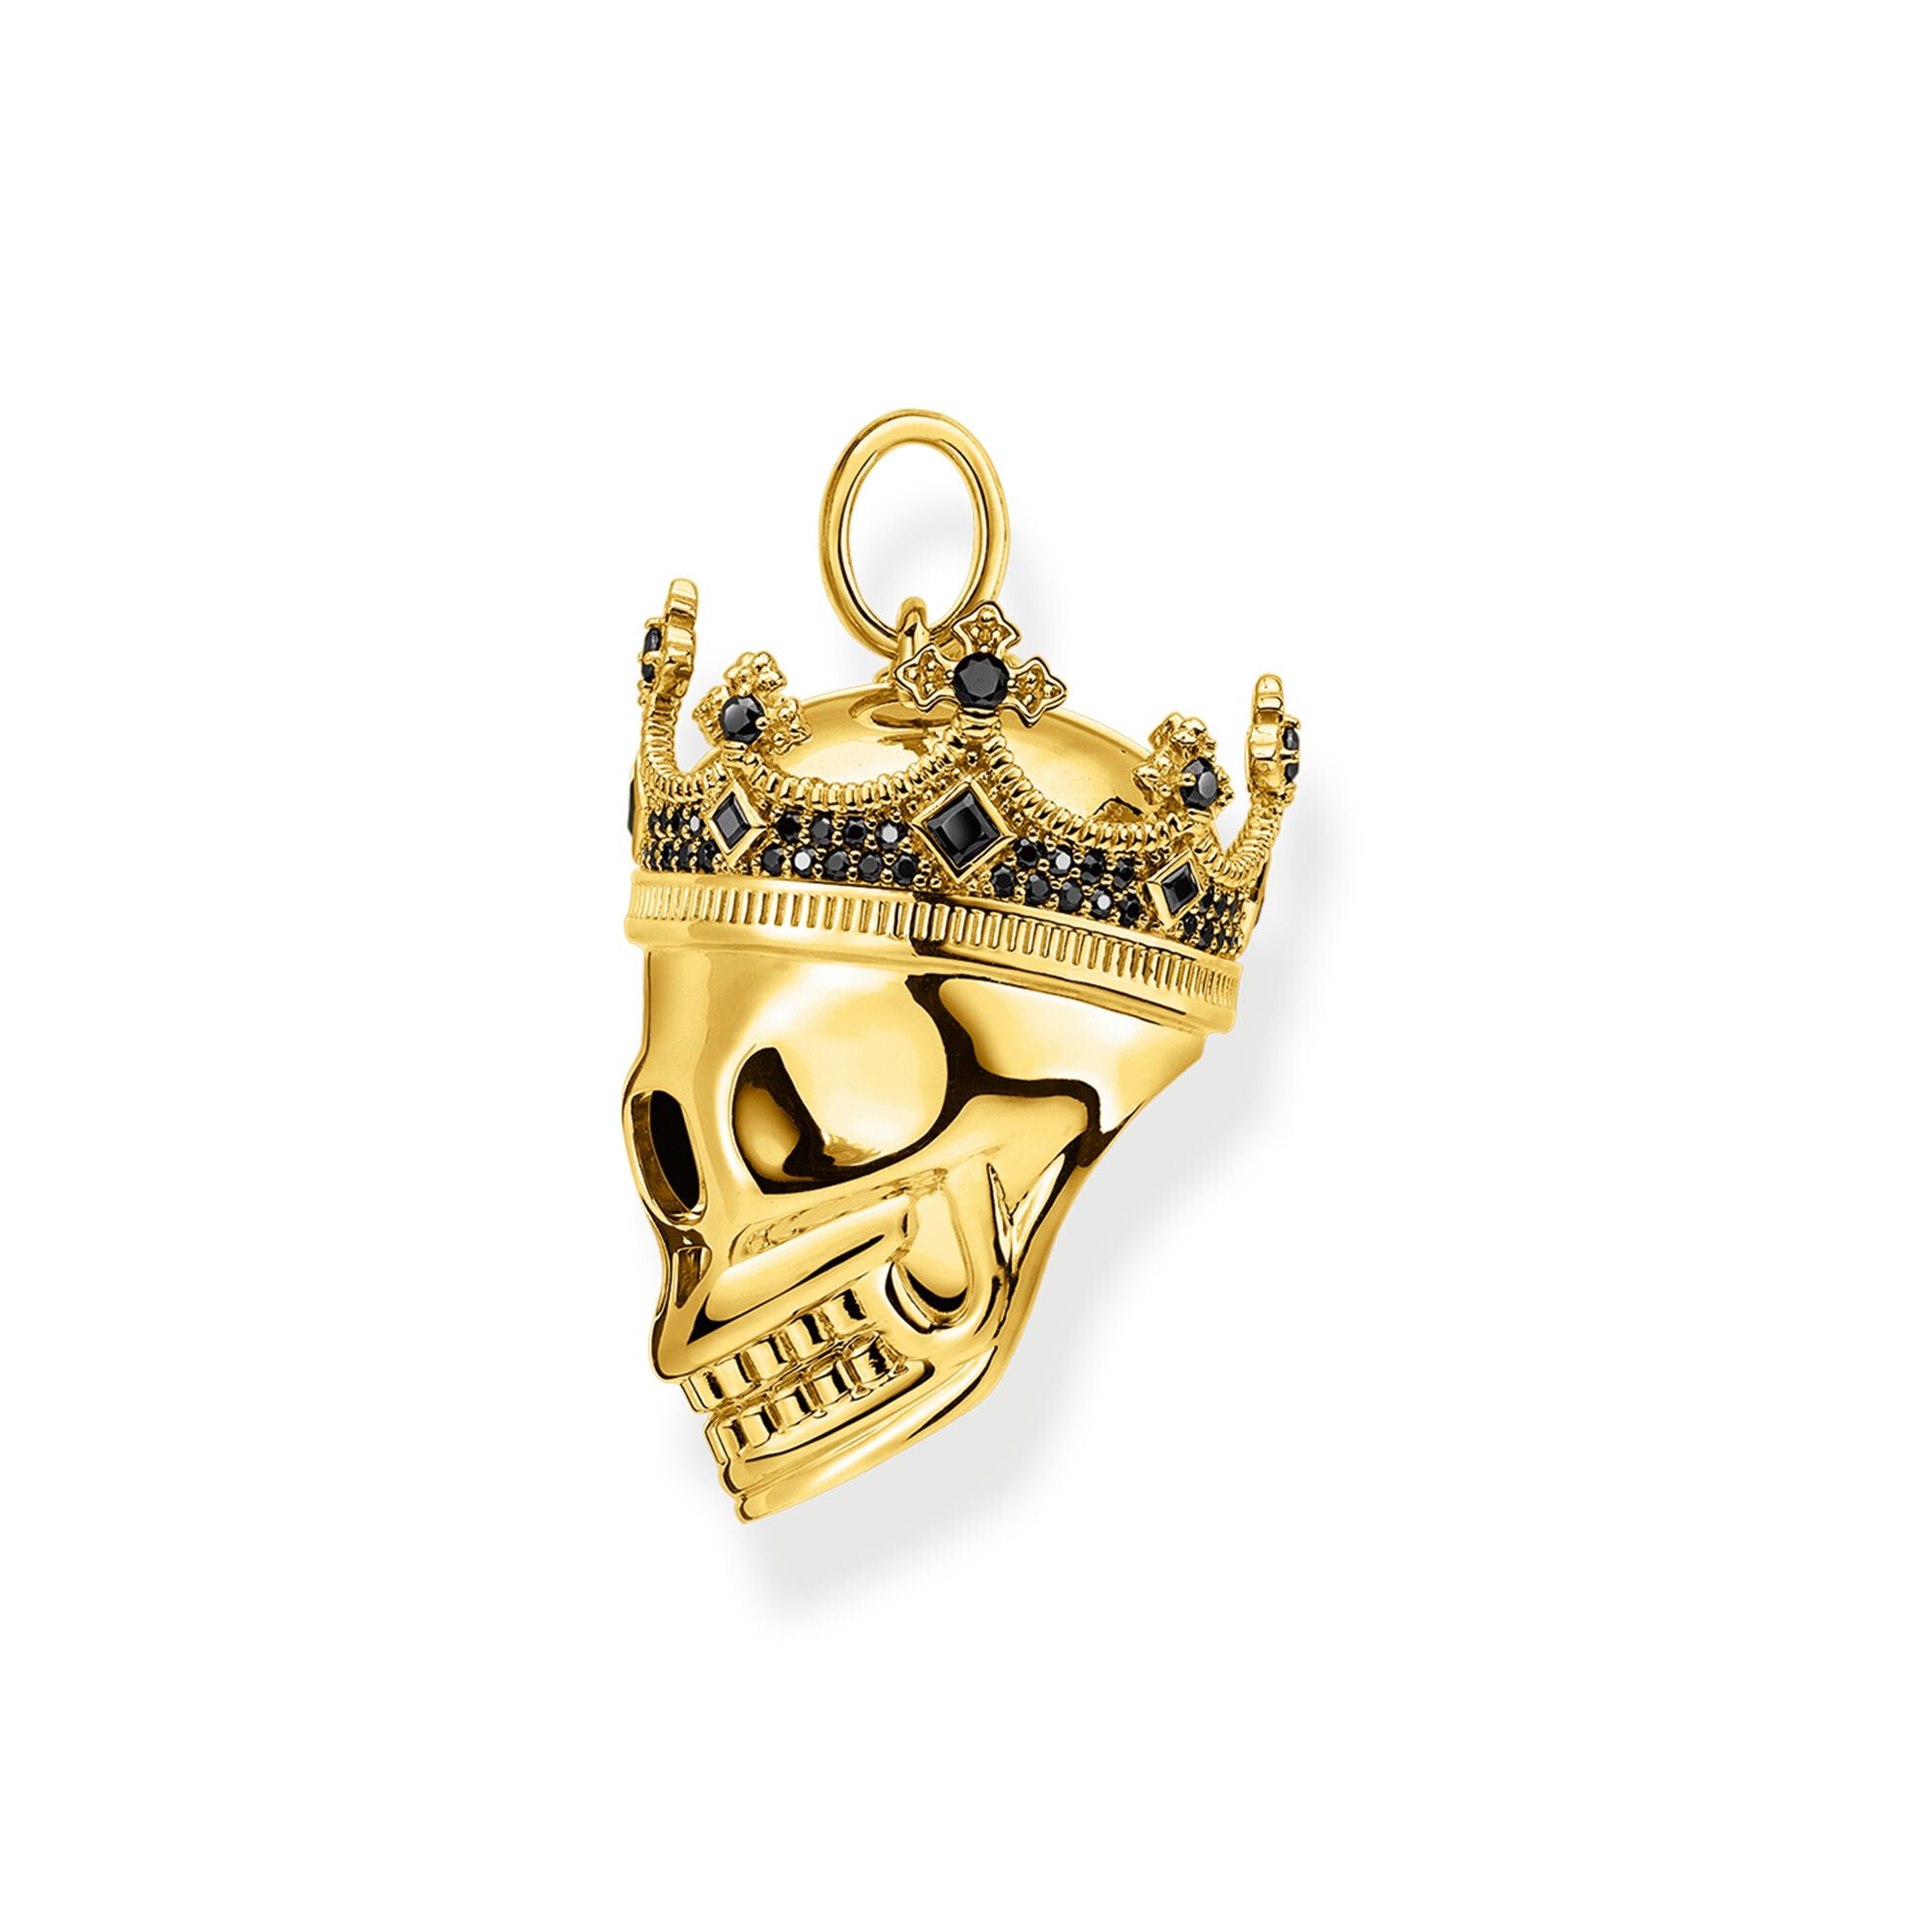 Thomas Sabo 18k Yellow Gold Plating Skull King Pendant from the side